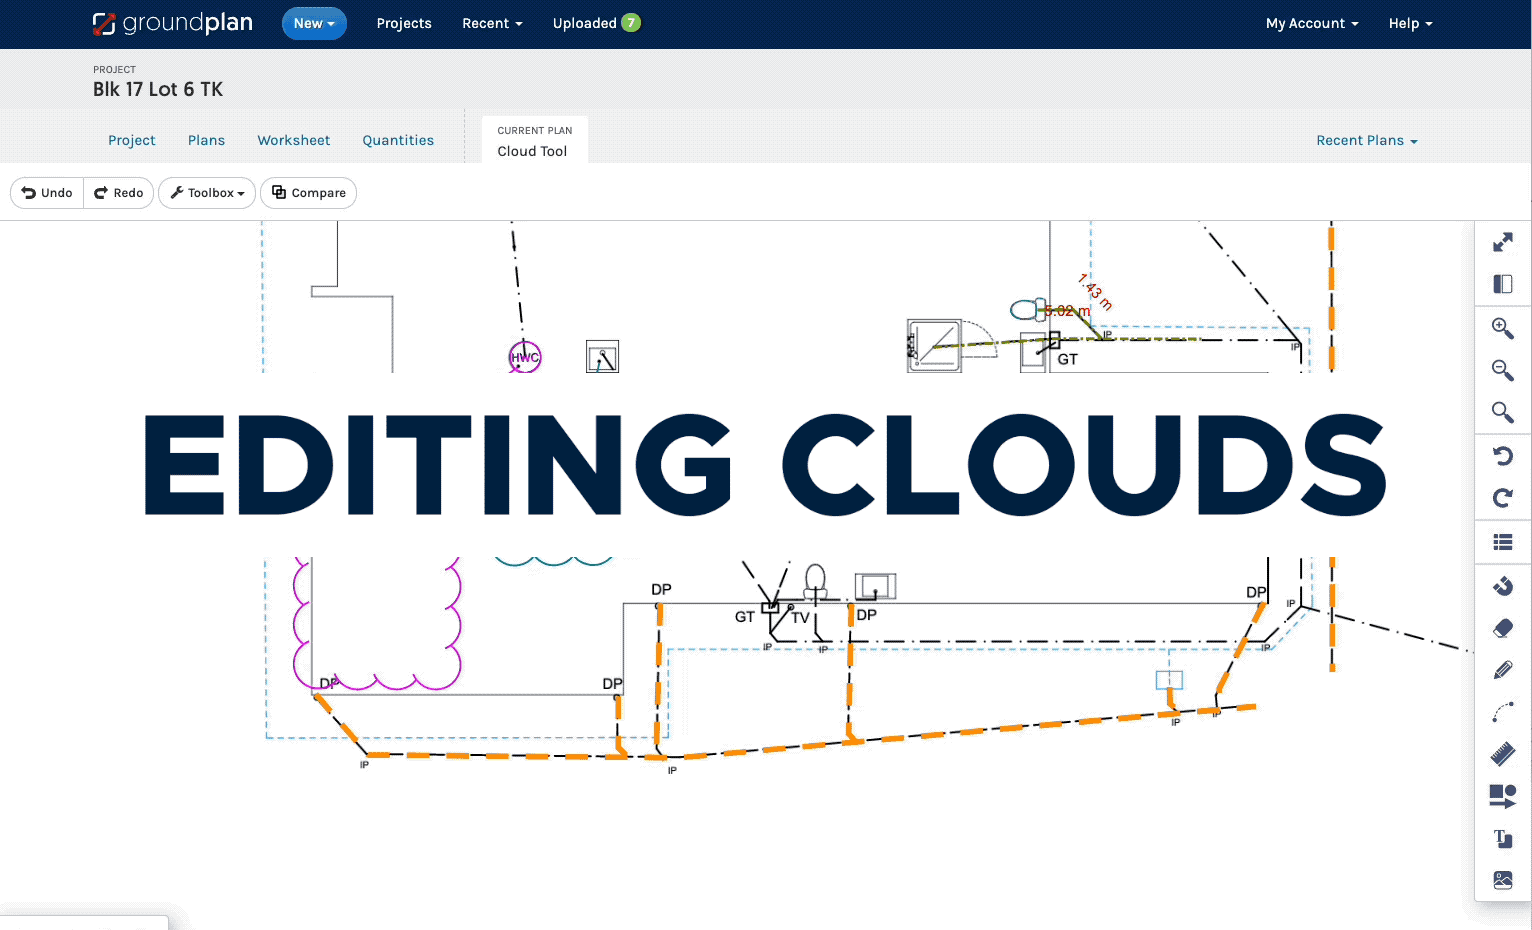 D2 - Editing Clouds